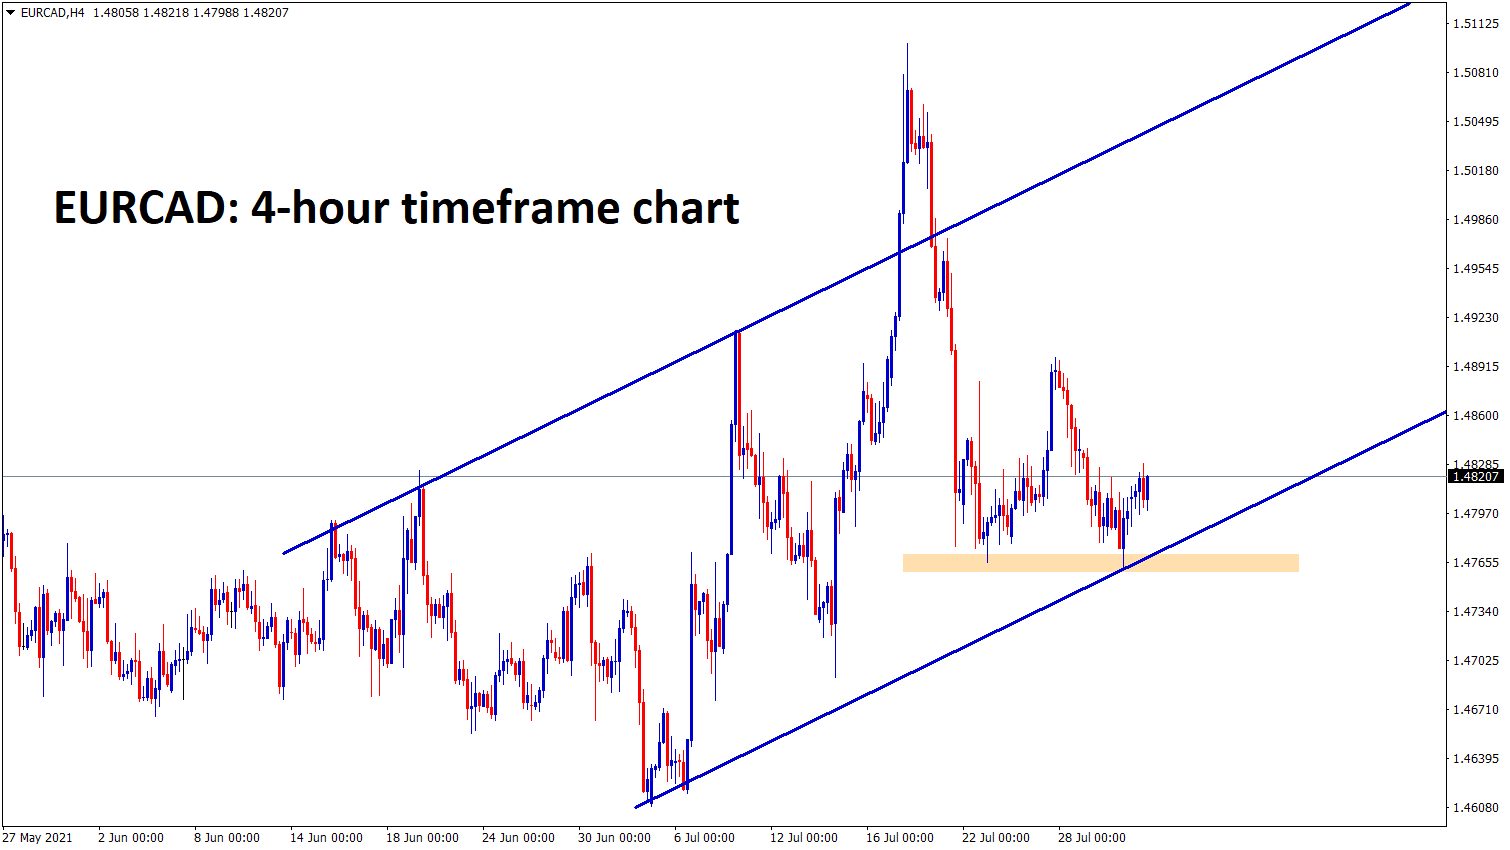 EURCAD bounces back from the recent support and higher low level of an uptrend line